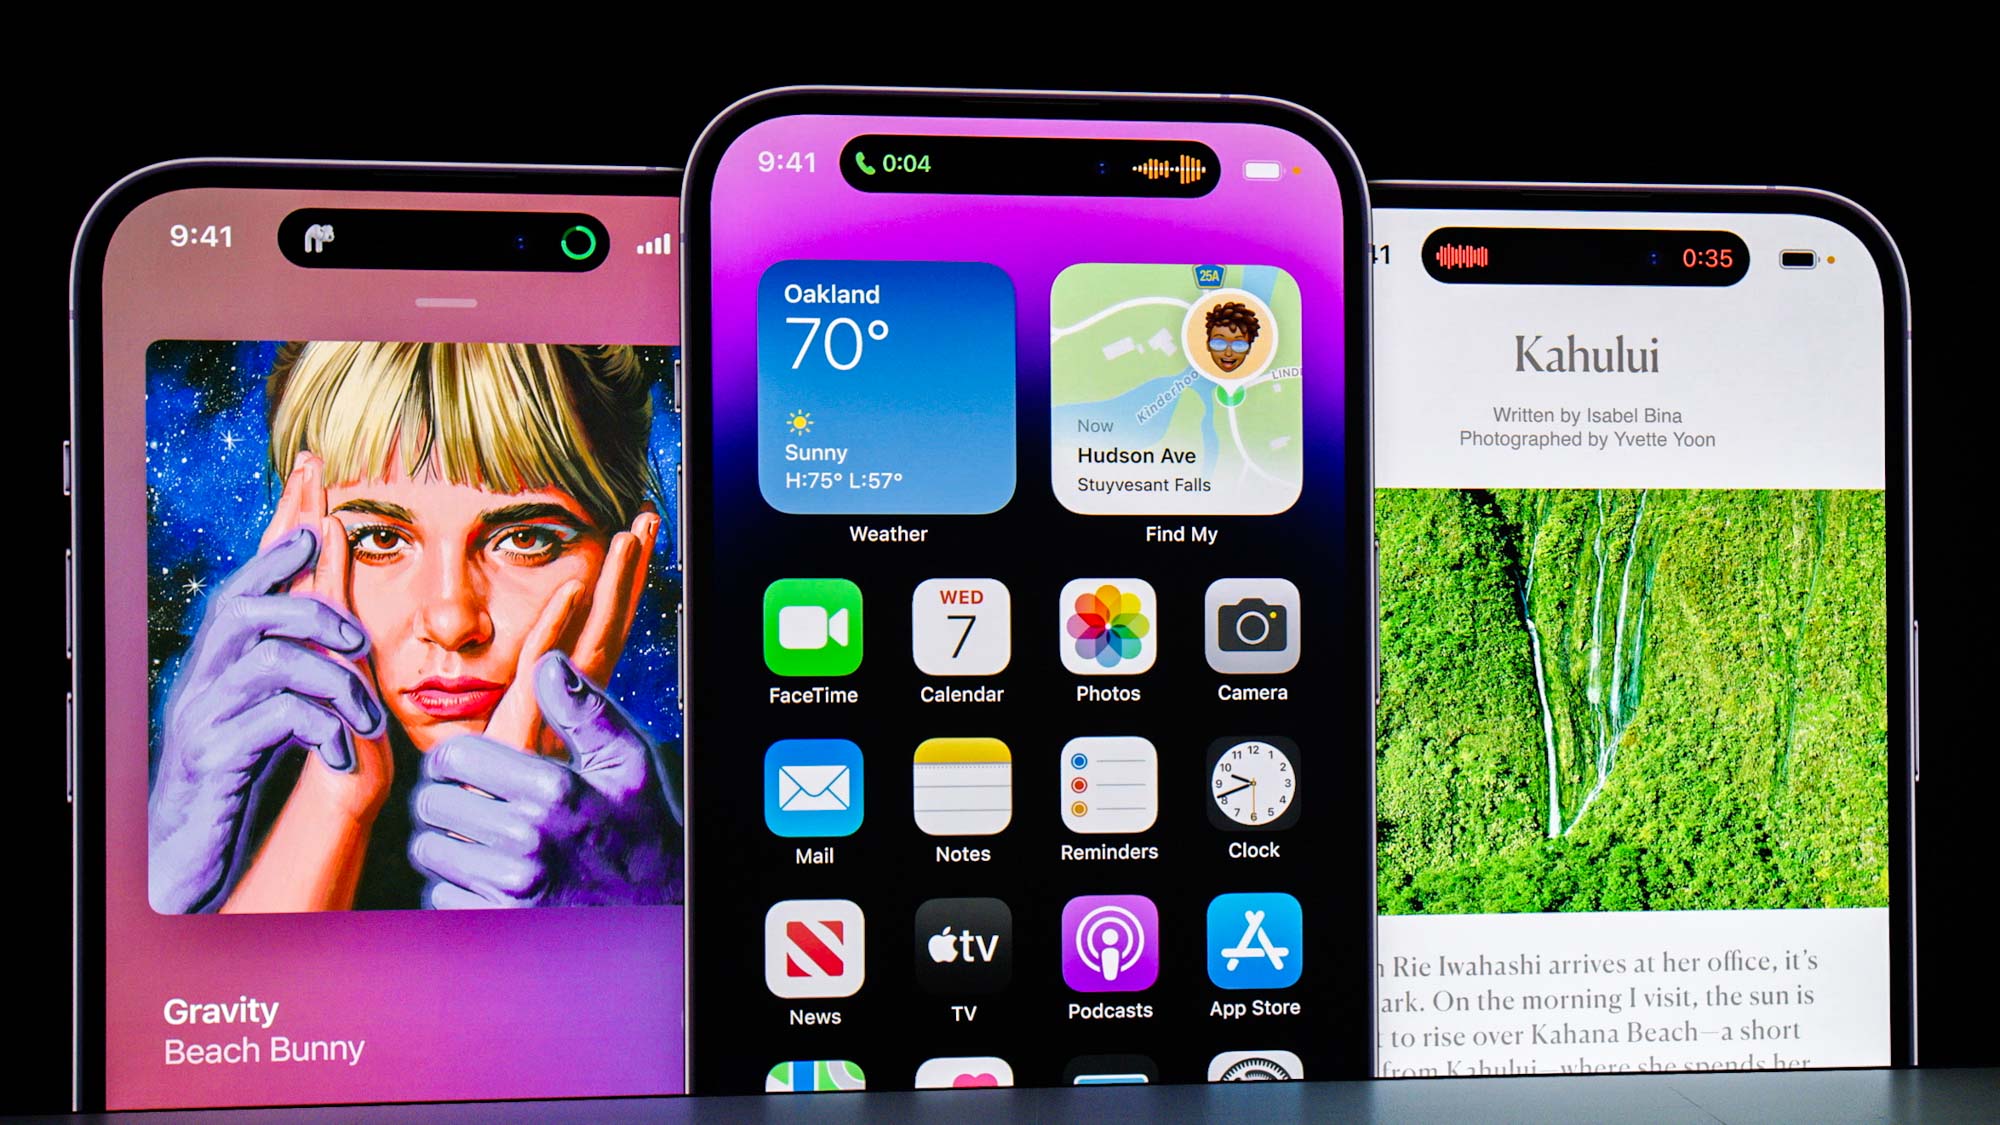 Apple Hub on X: The iPhone 15 Pro series is rumored to start at 256GB base  storage Which model would you upgrade to?  / X